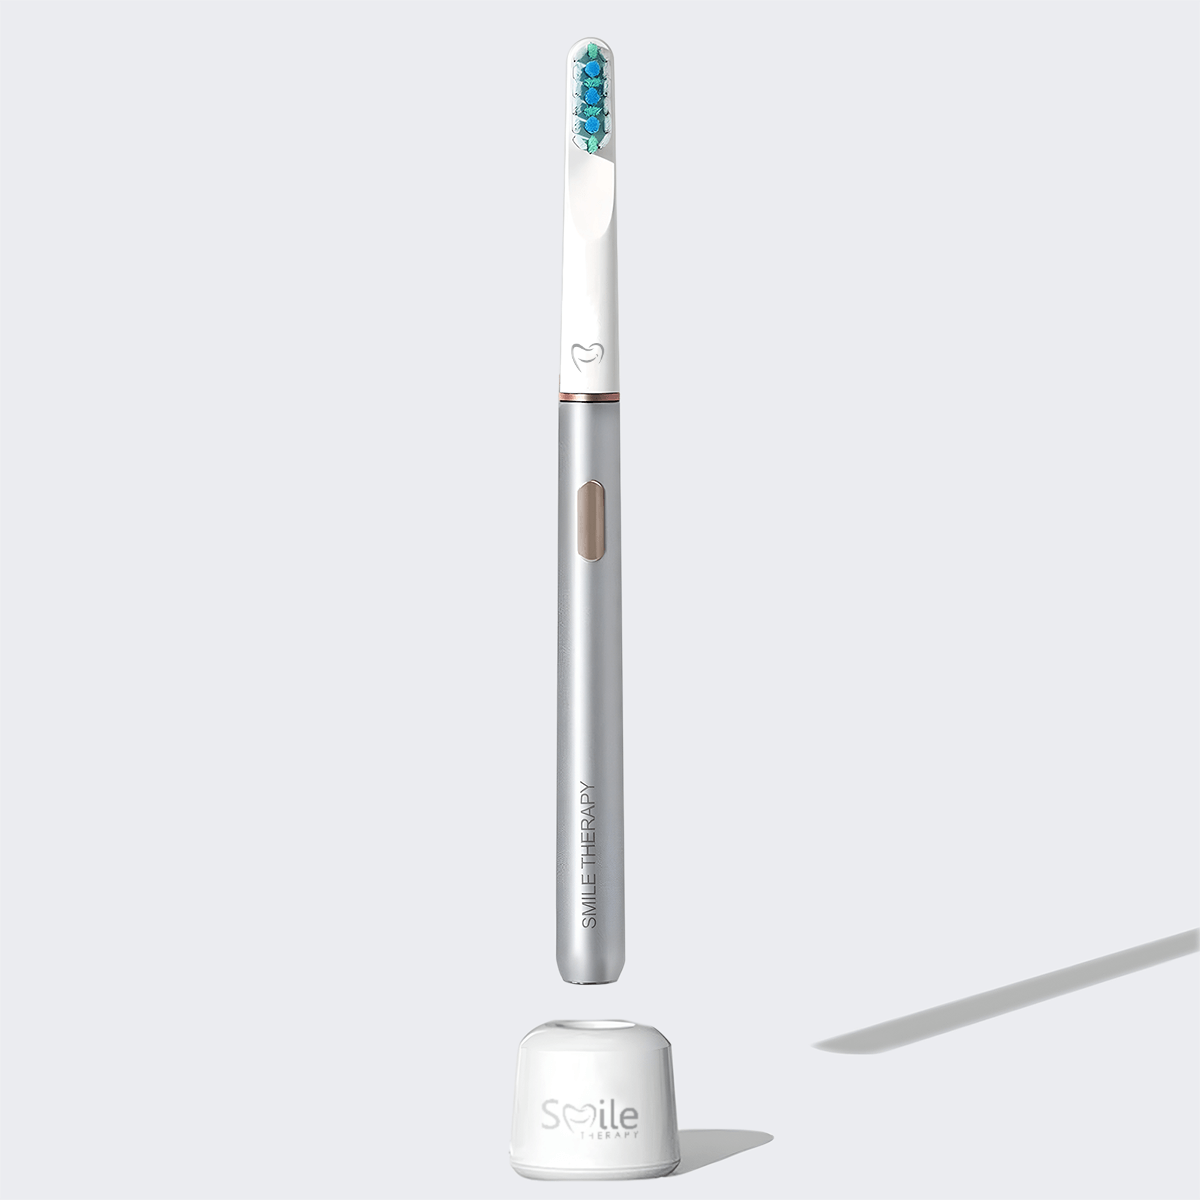 Air Advanced Electric Toothbrush 3-in-1 DP8